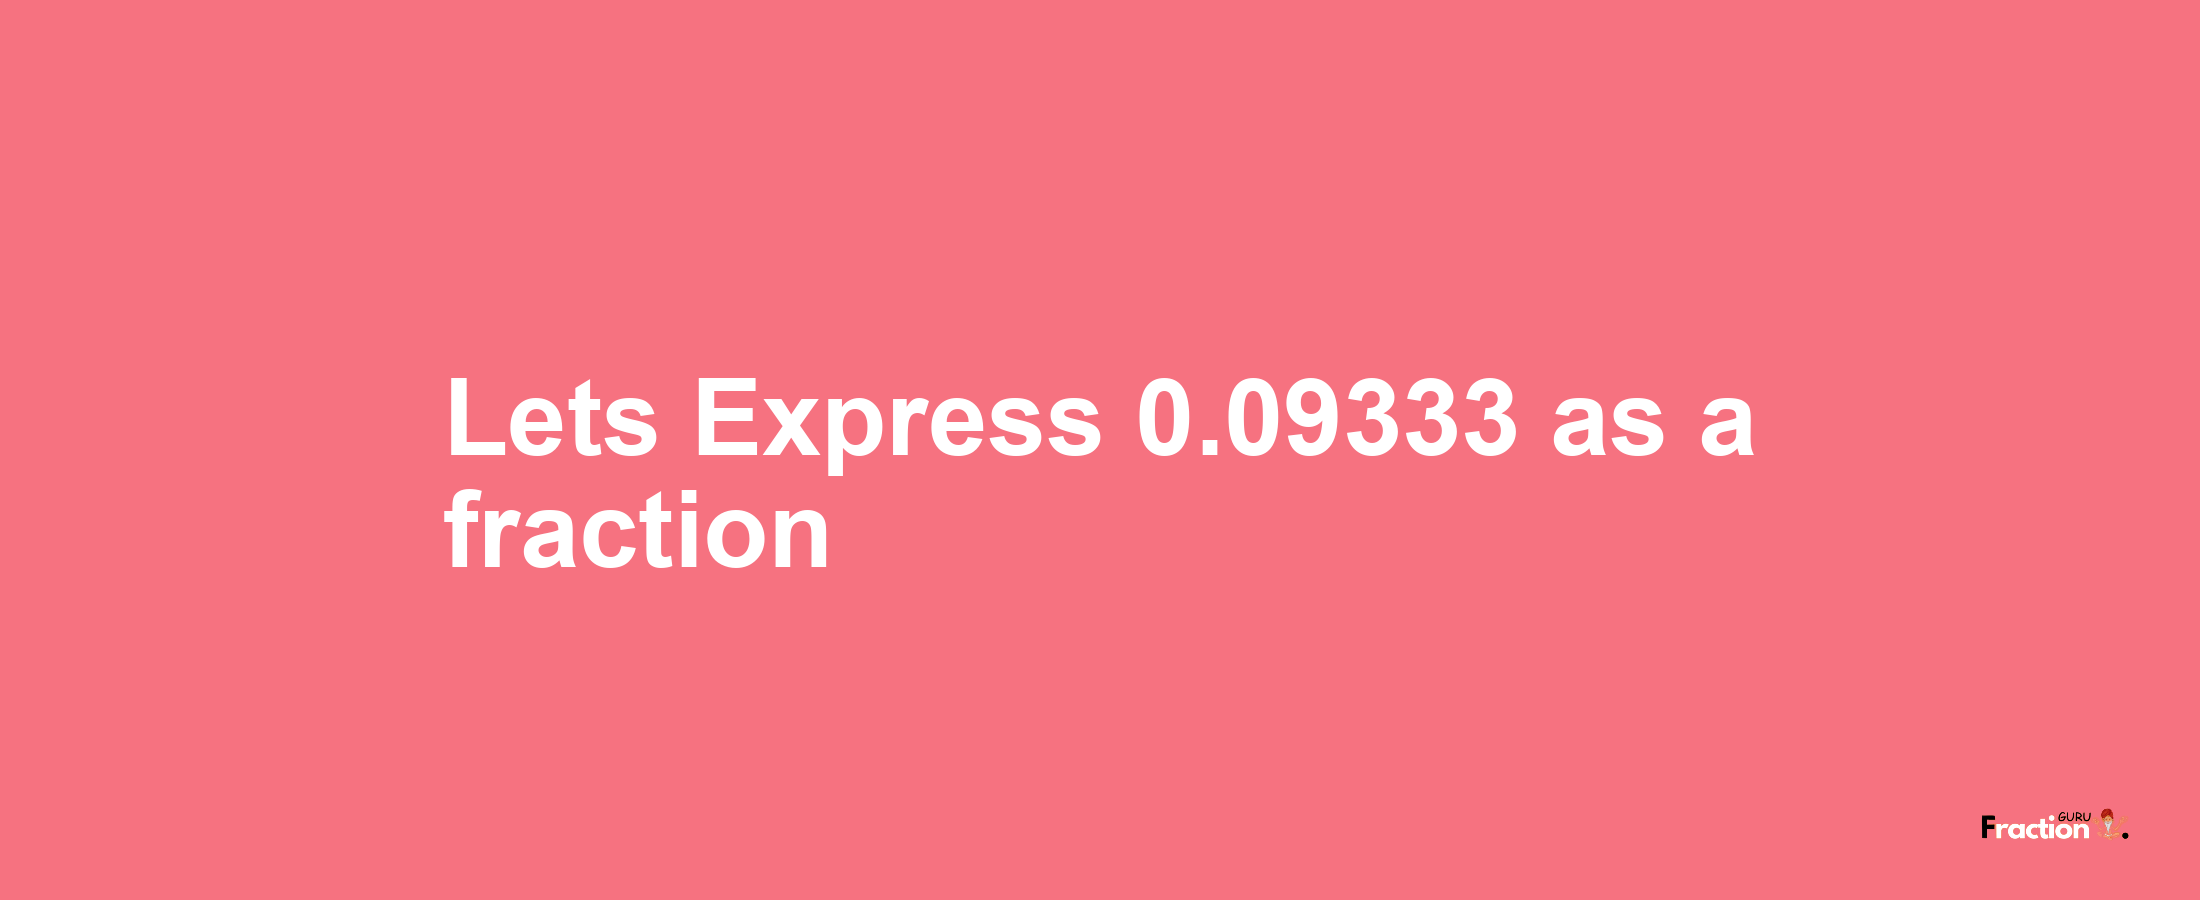 Lets Express 0.09333 as afraction